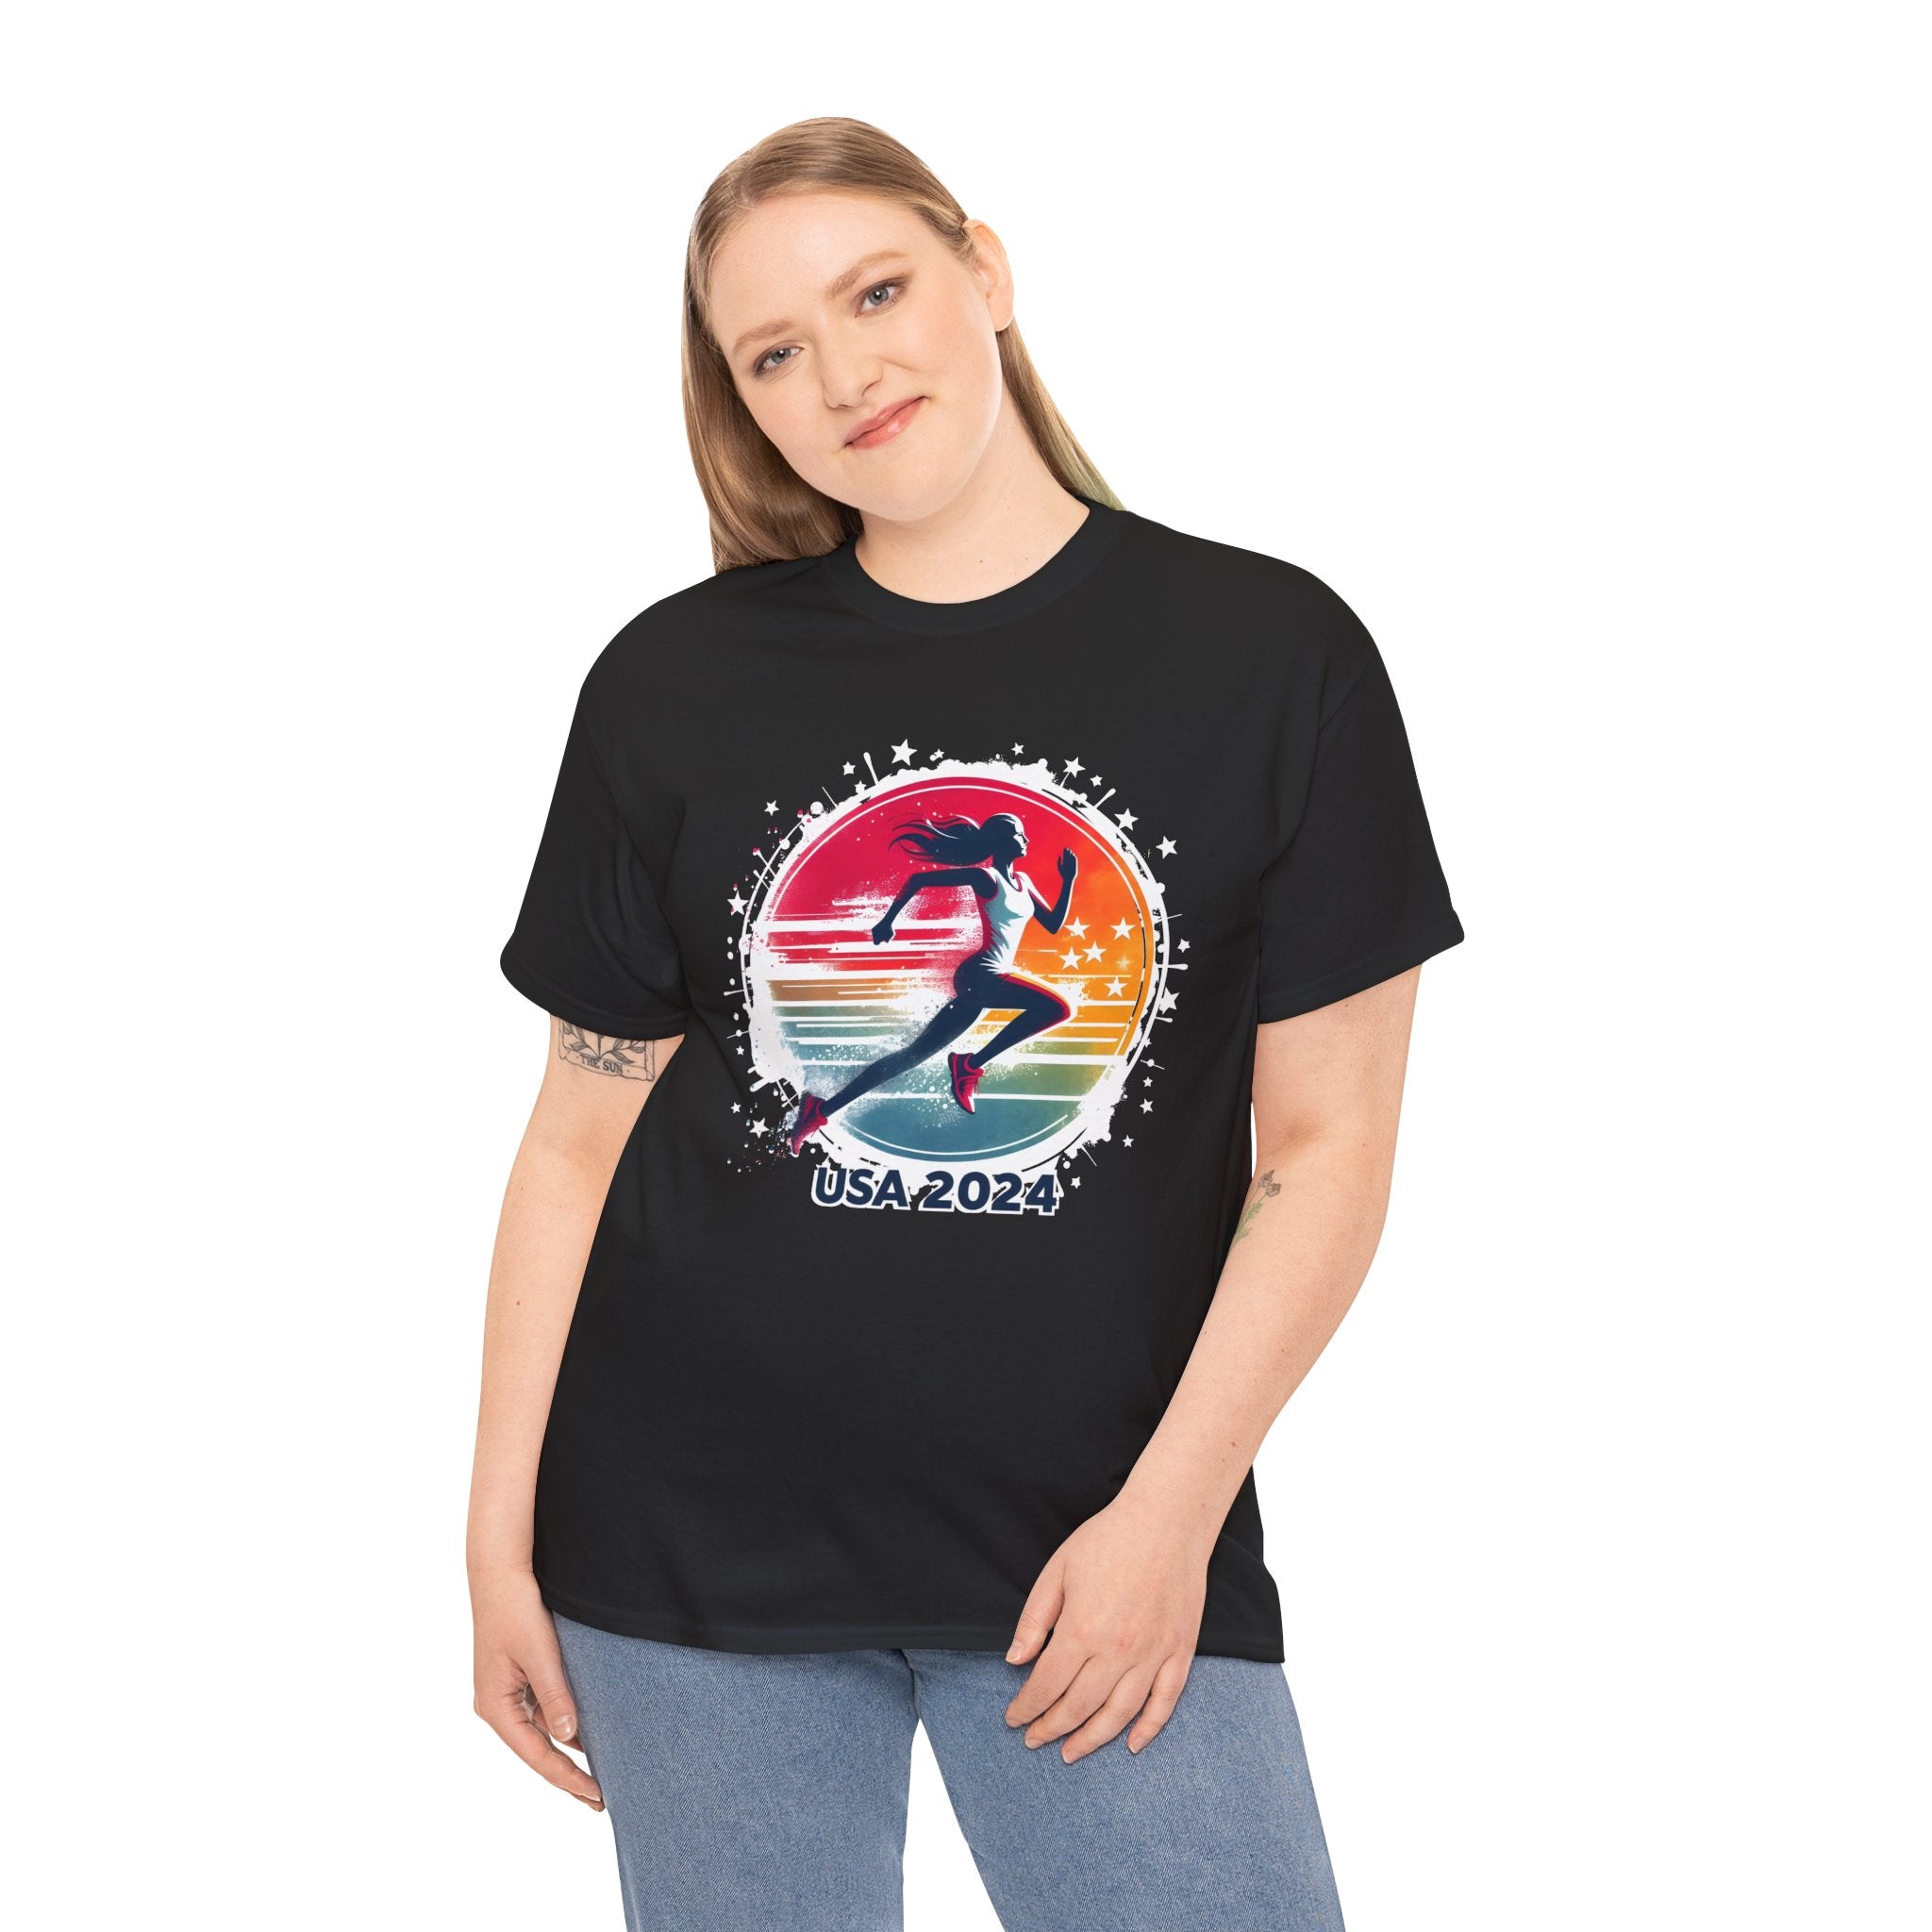 USA 2024 Go United States America 2024 USA Track and Field Plus Size Shirts for Women